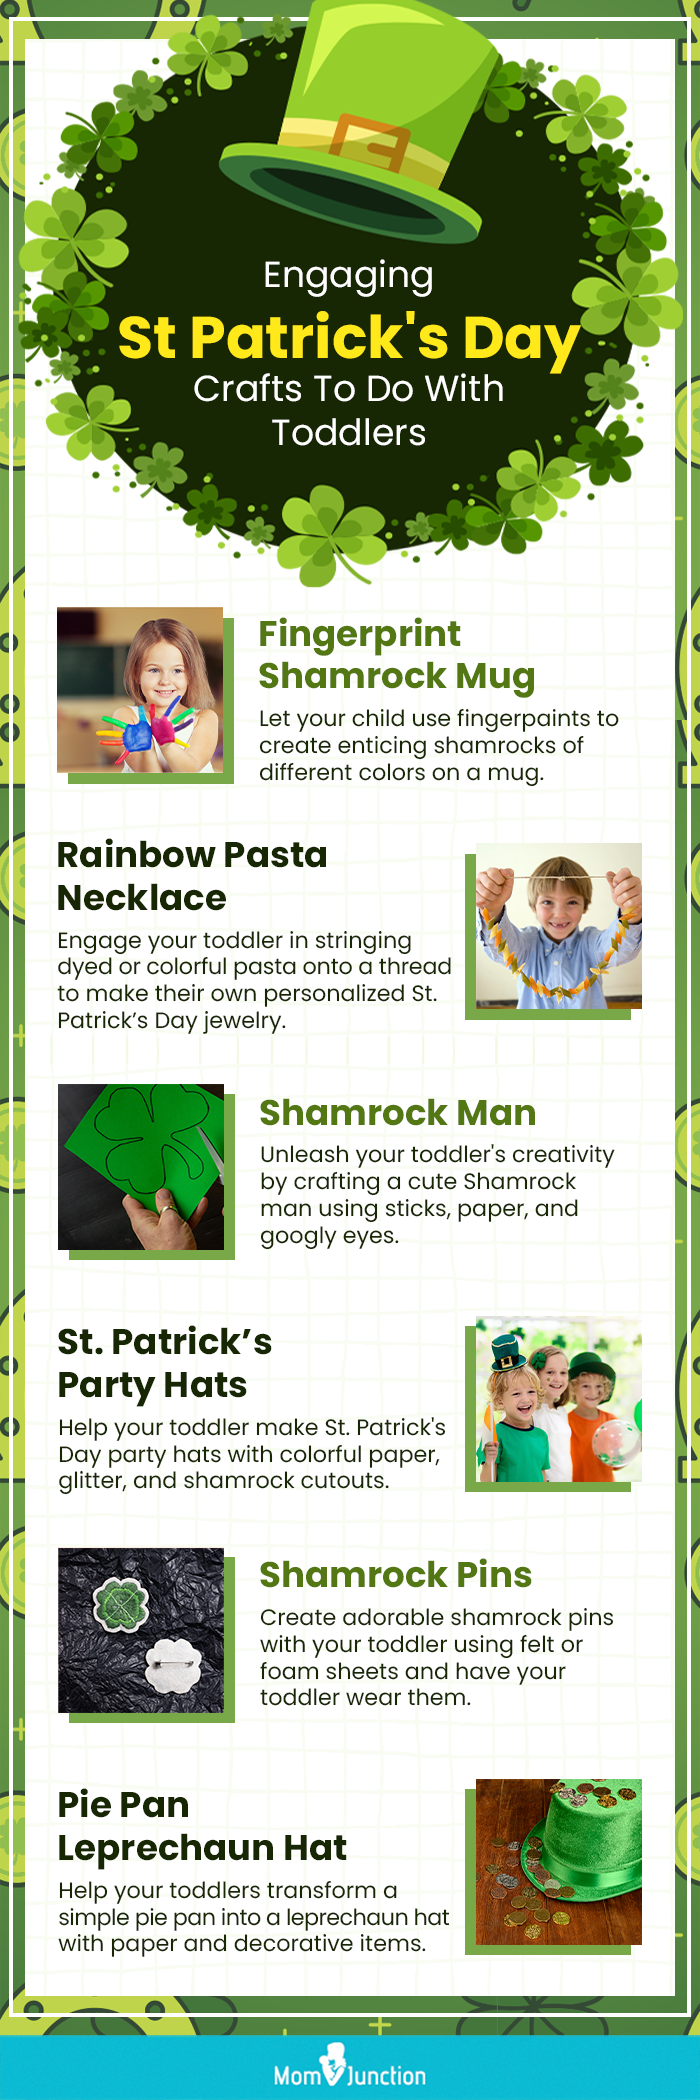 engaging st patricks day crafts to do with toddlers (infographic)